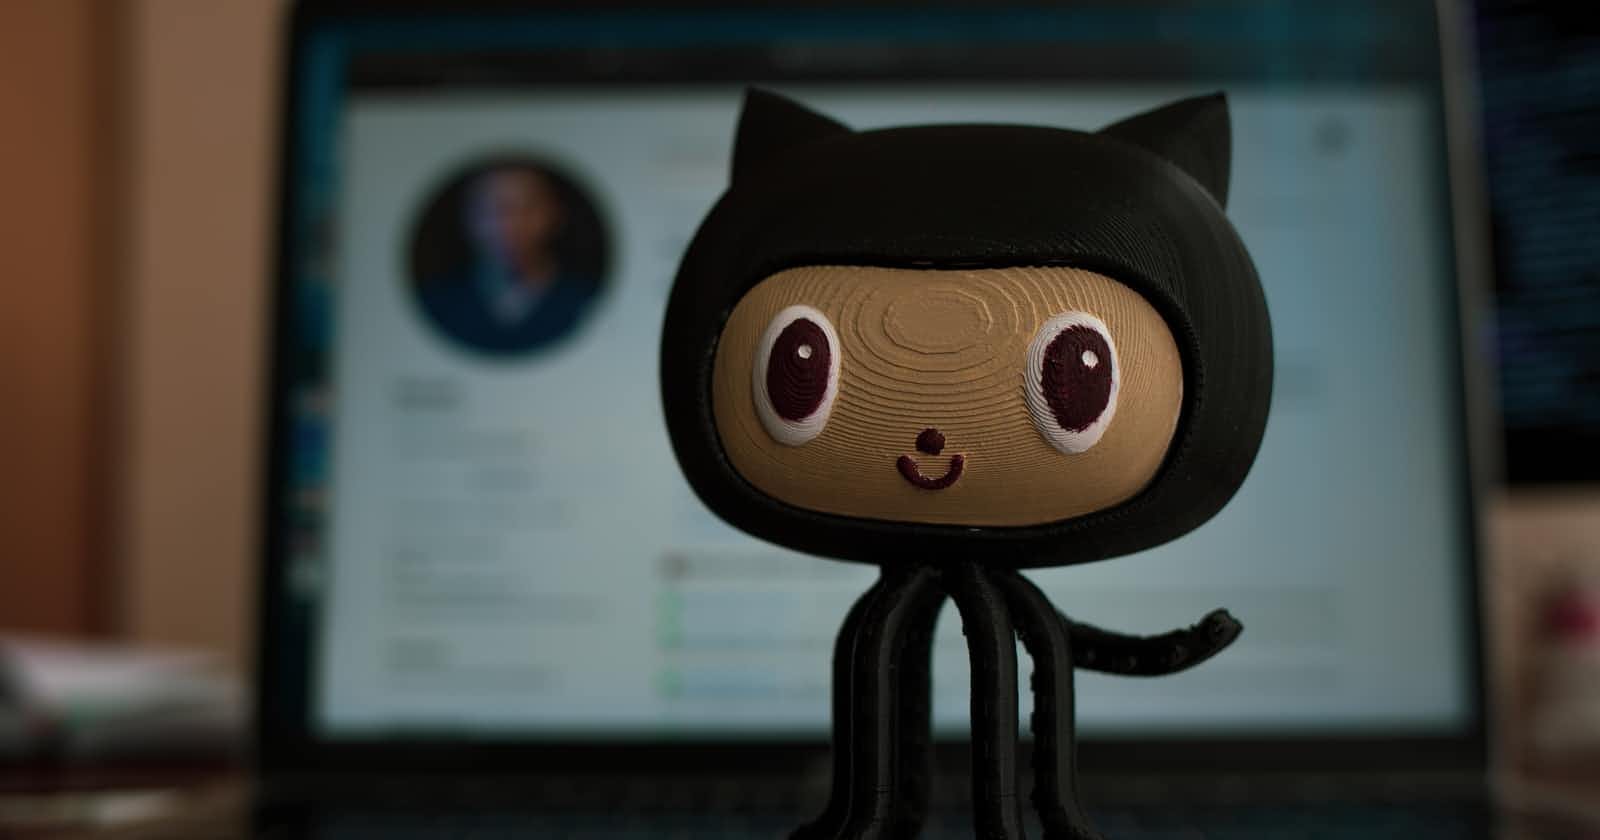 How to Complete a Pull Request on GitHub